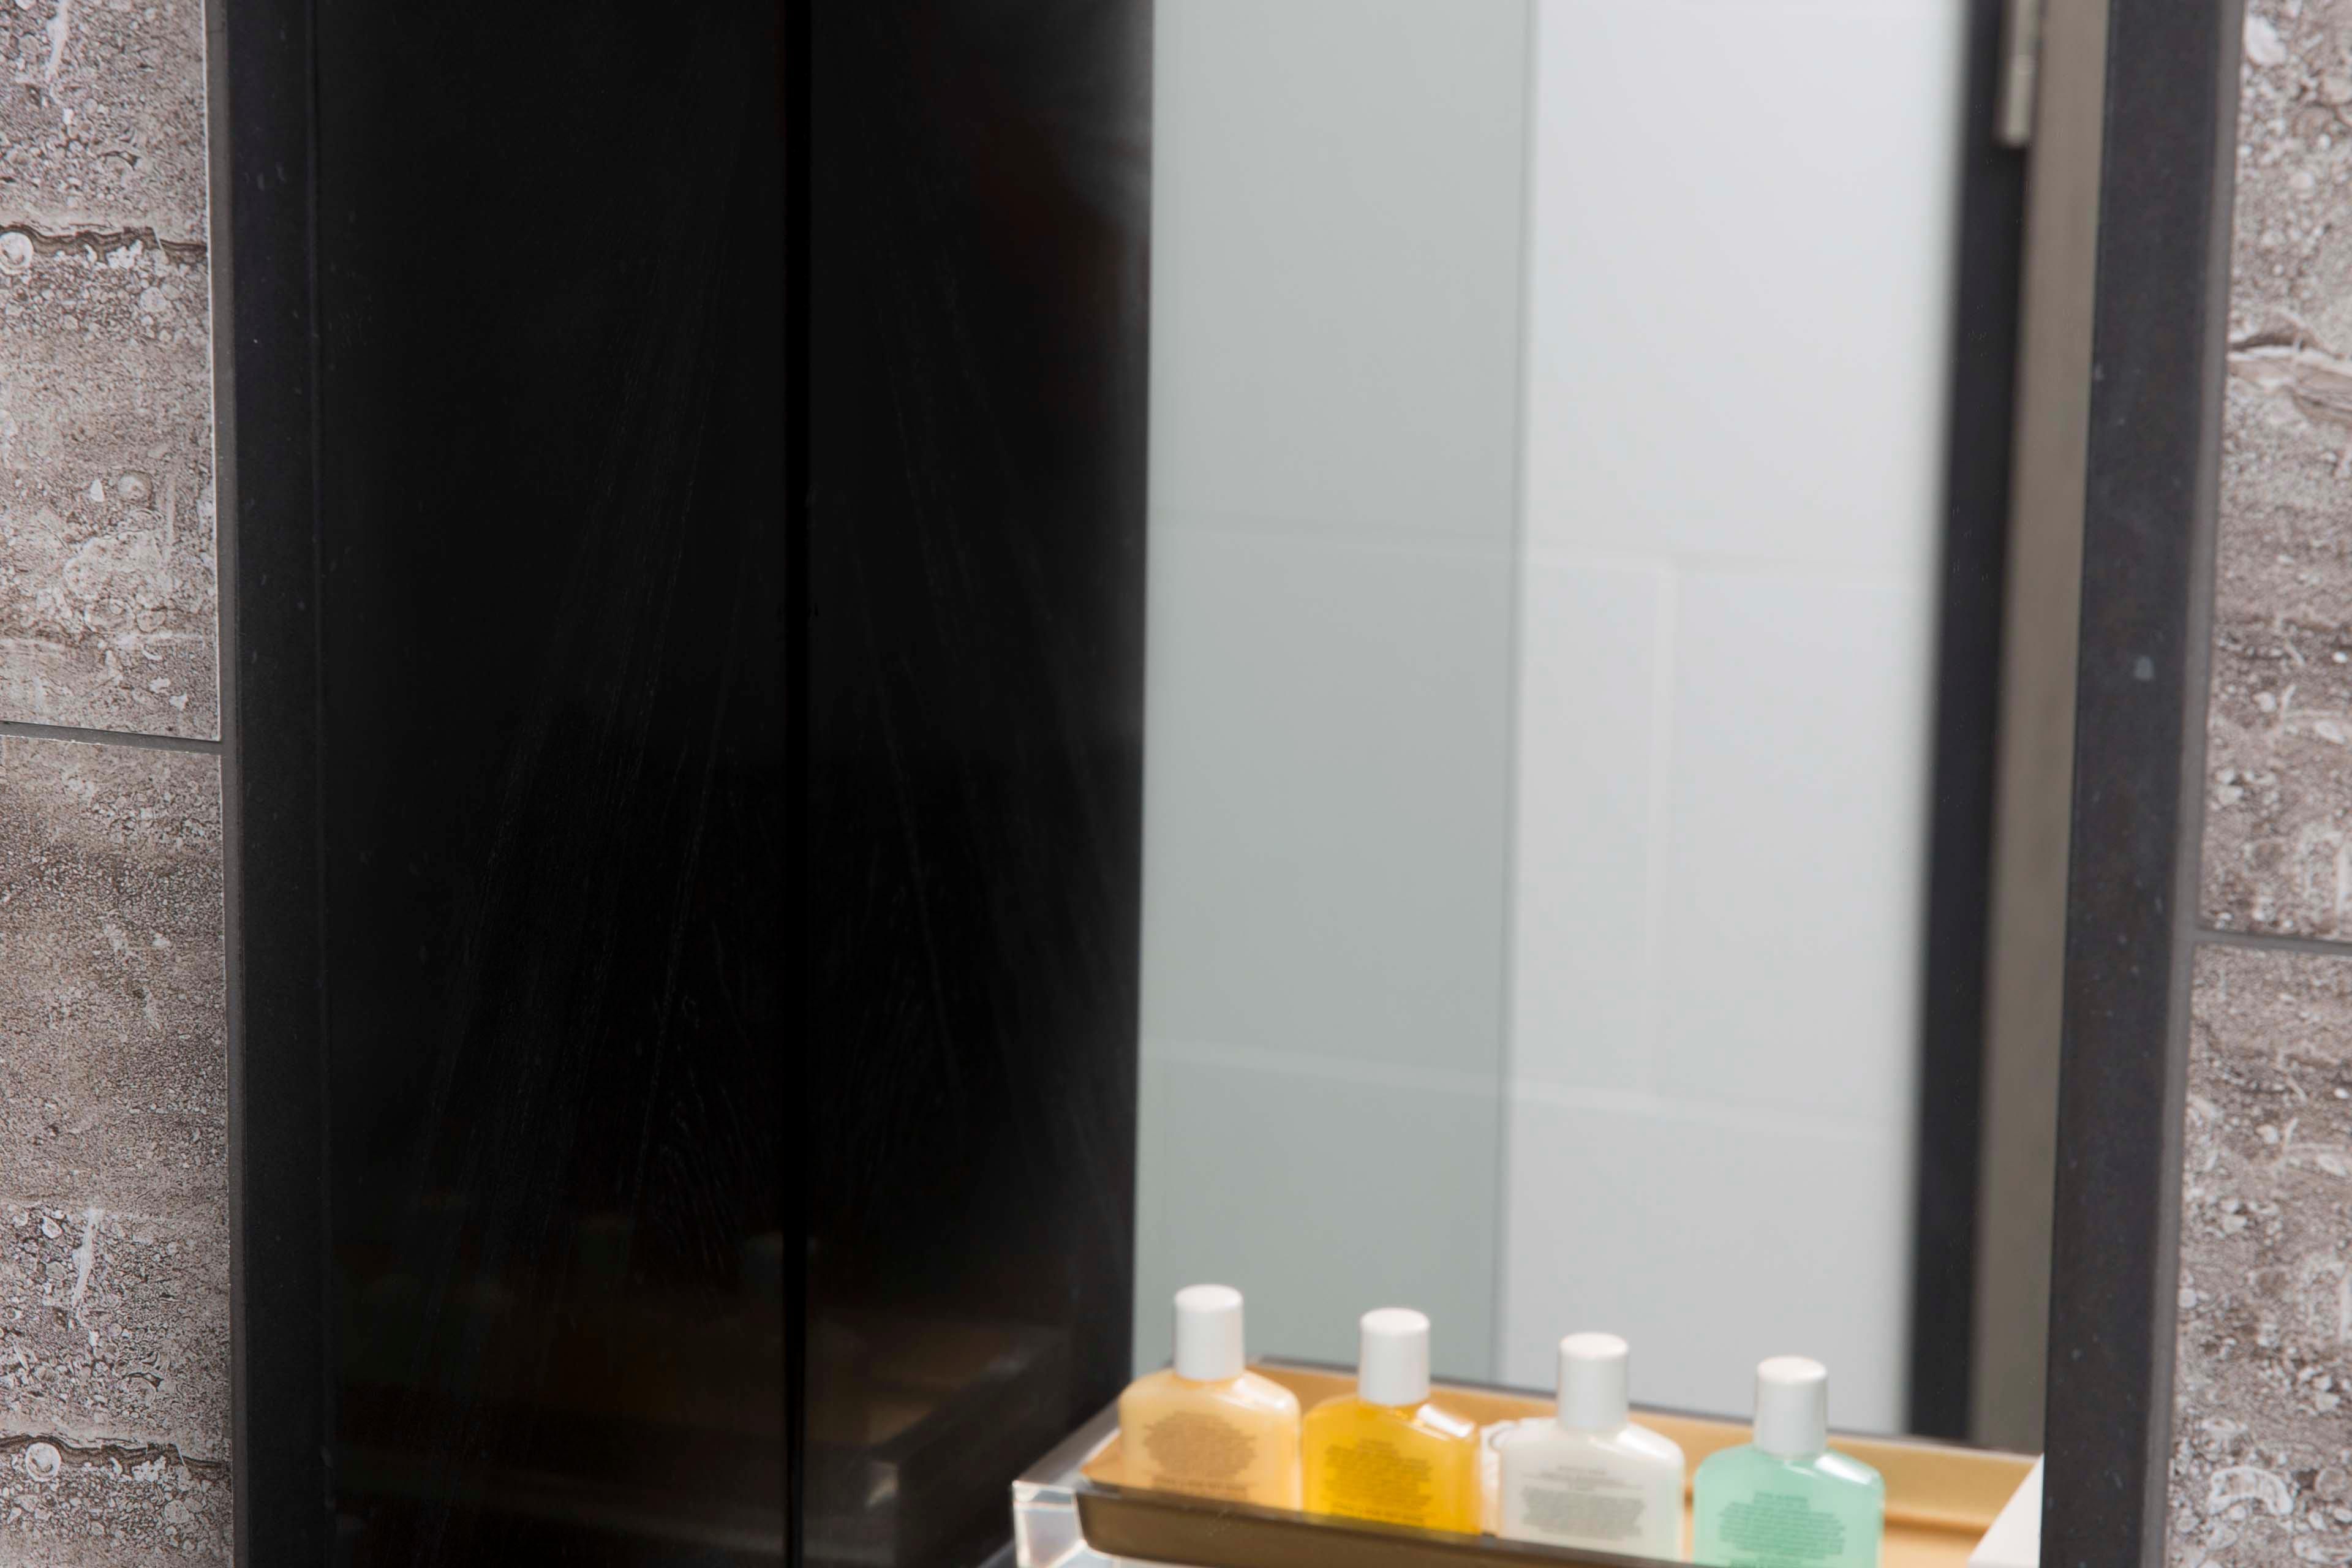 Enjoy a wide range of luxurious toiletries in our bathrooms.